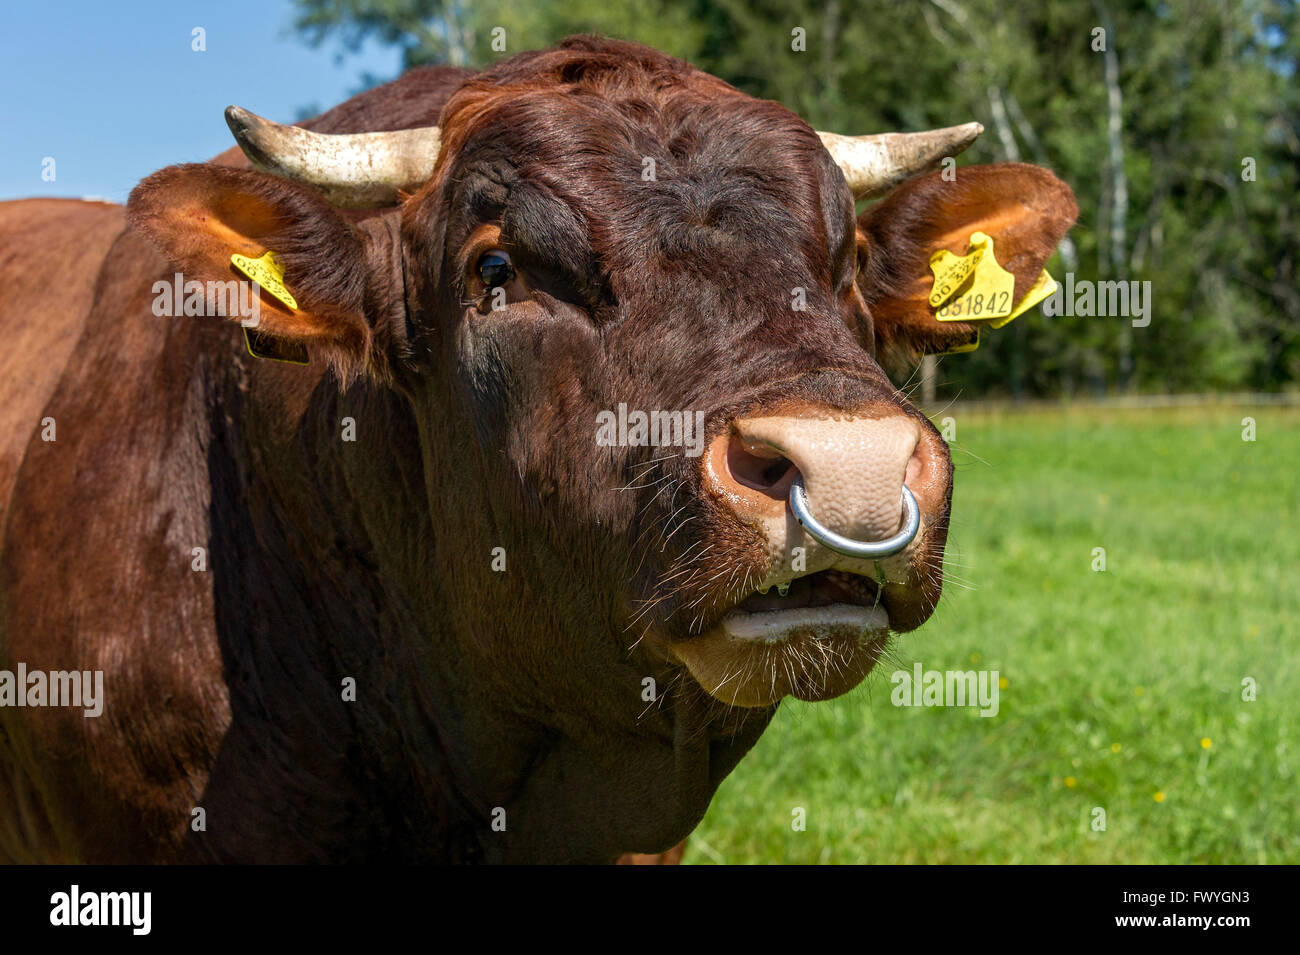 Dangerous Looking Bull With Nose Ring Stock Photo, Picture and Royalty Free  Image. Image 83819366.